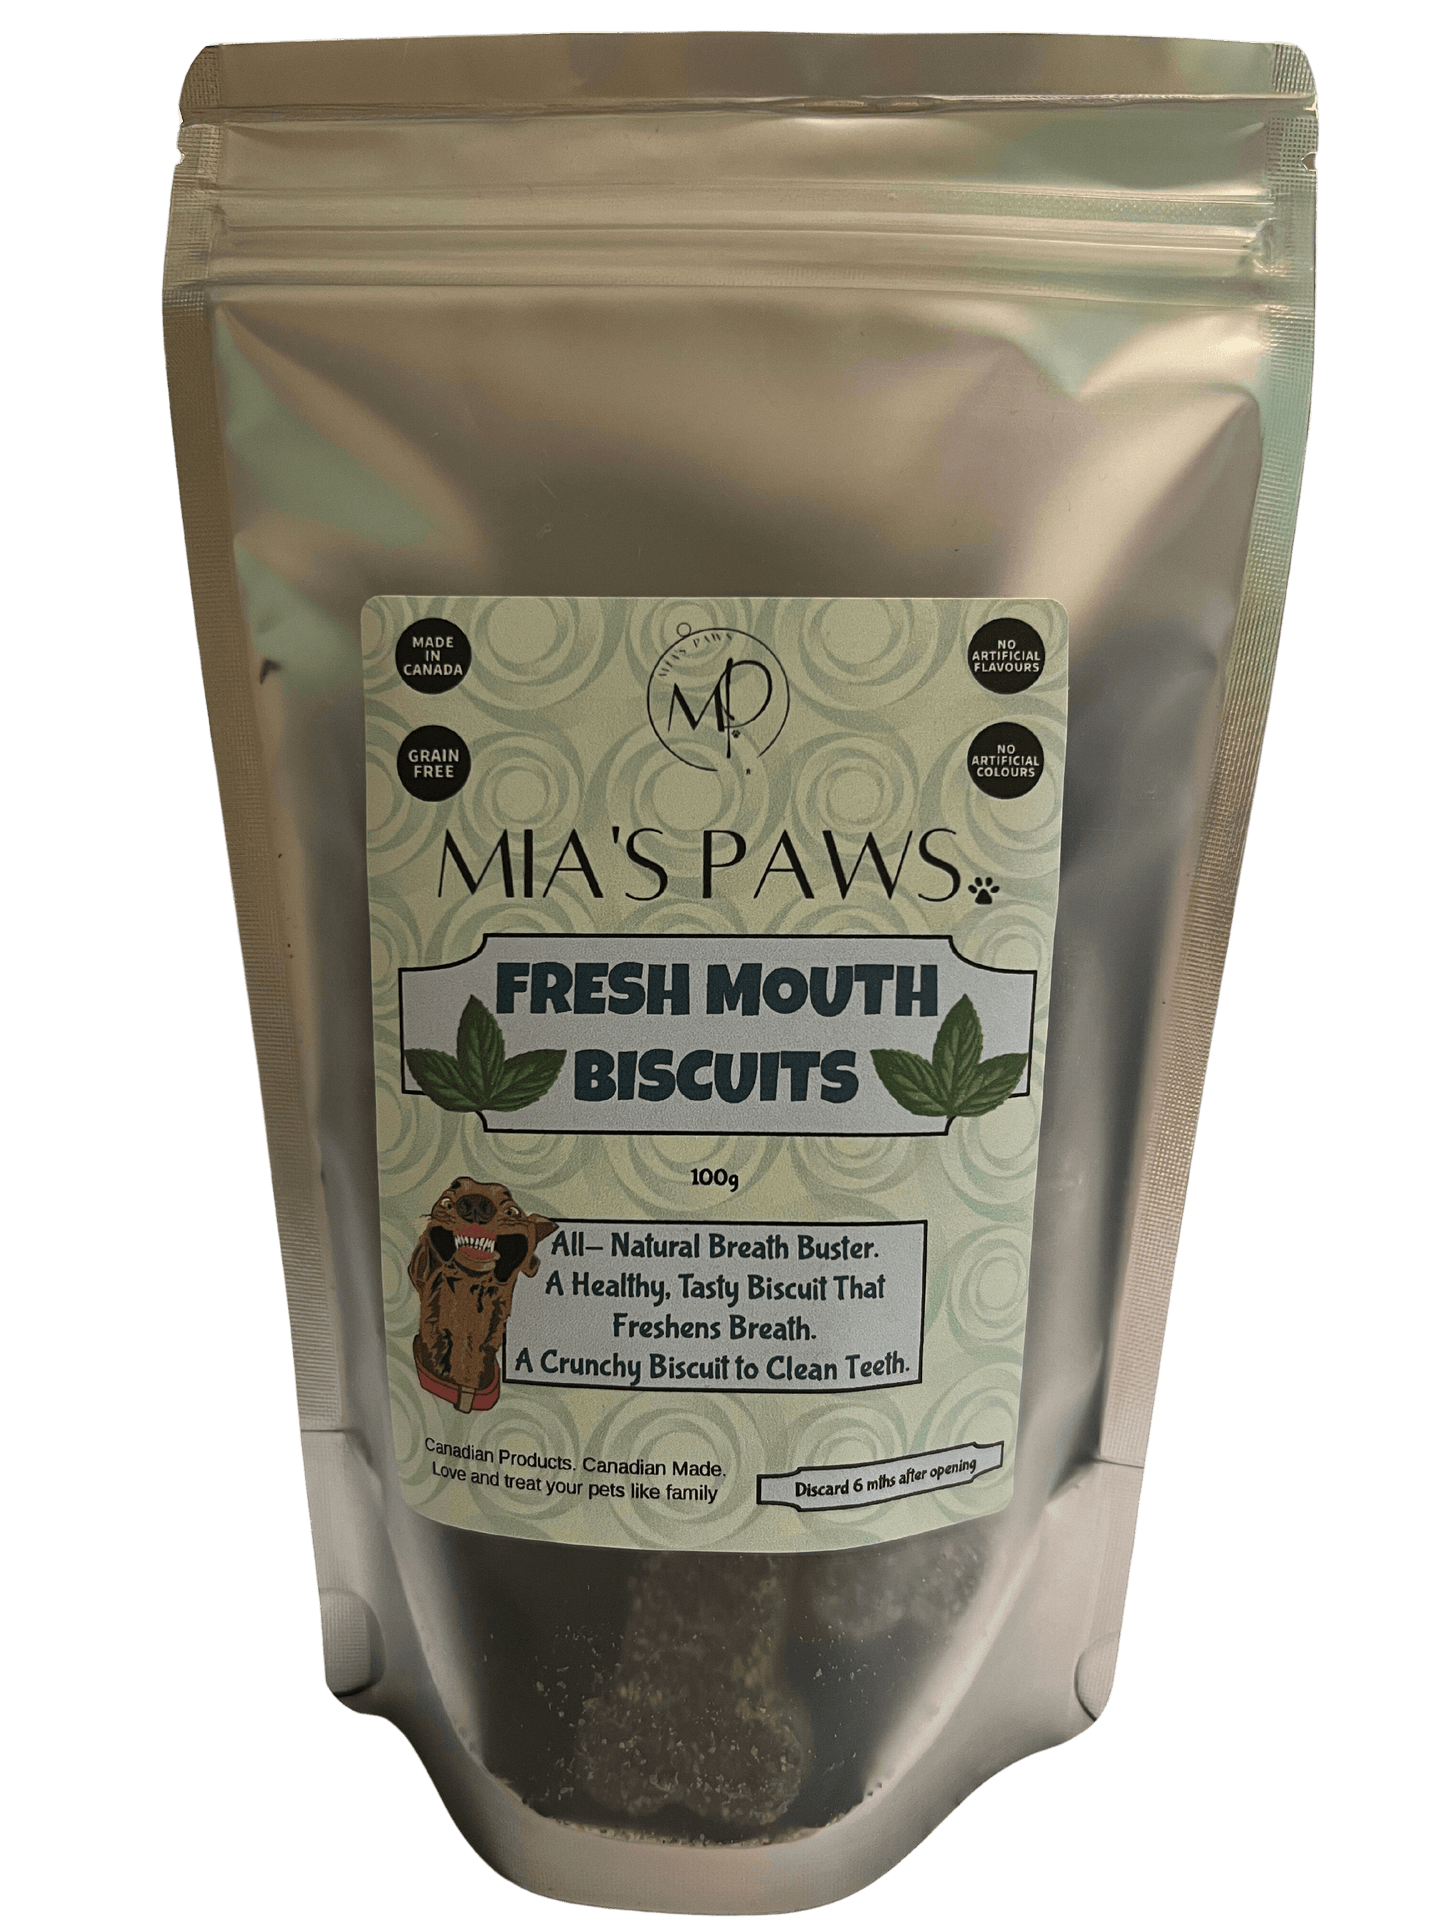 Fresh Mouth Biscuits - Mia's Paws